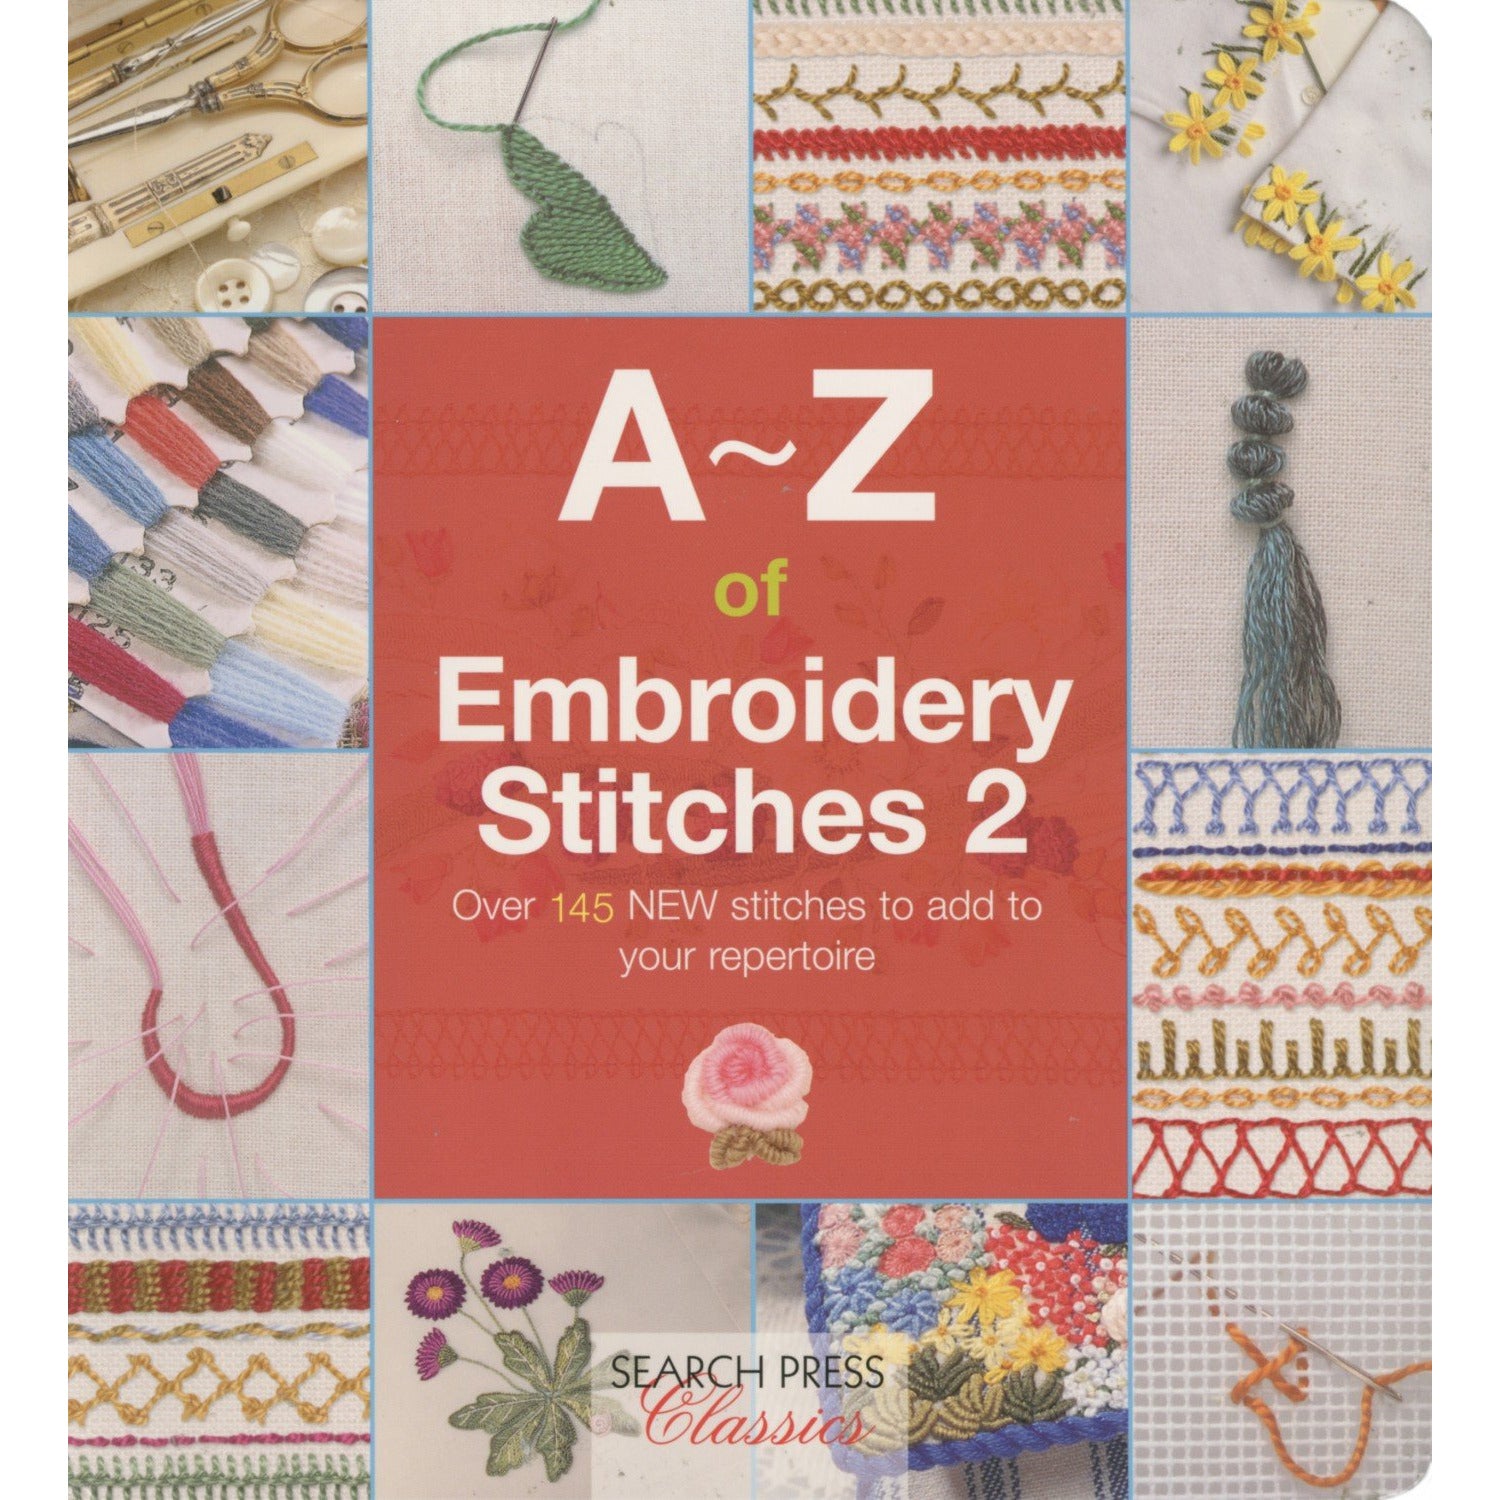 A-Z of Embroidery Stitches – Hobby House Needleworks